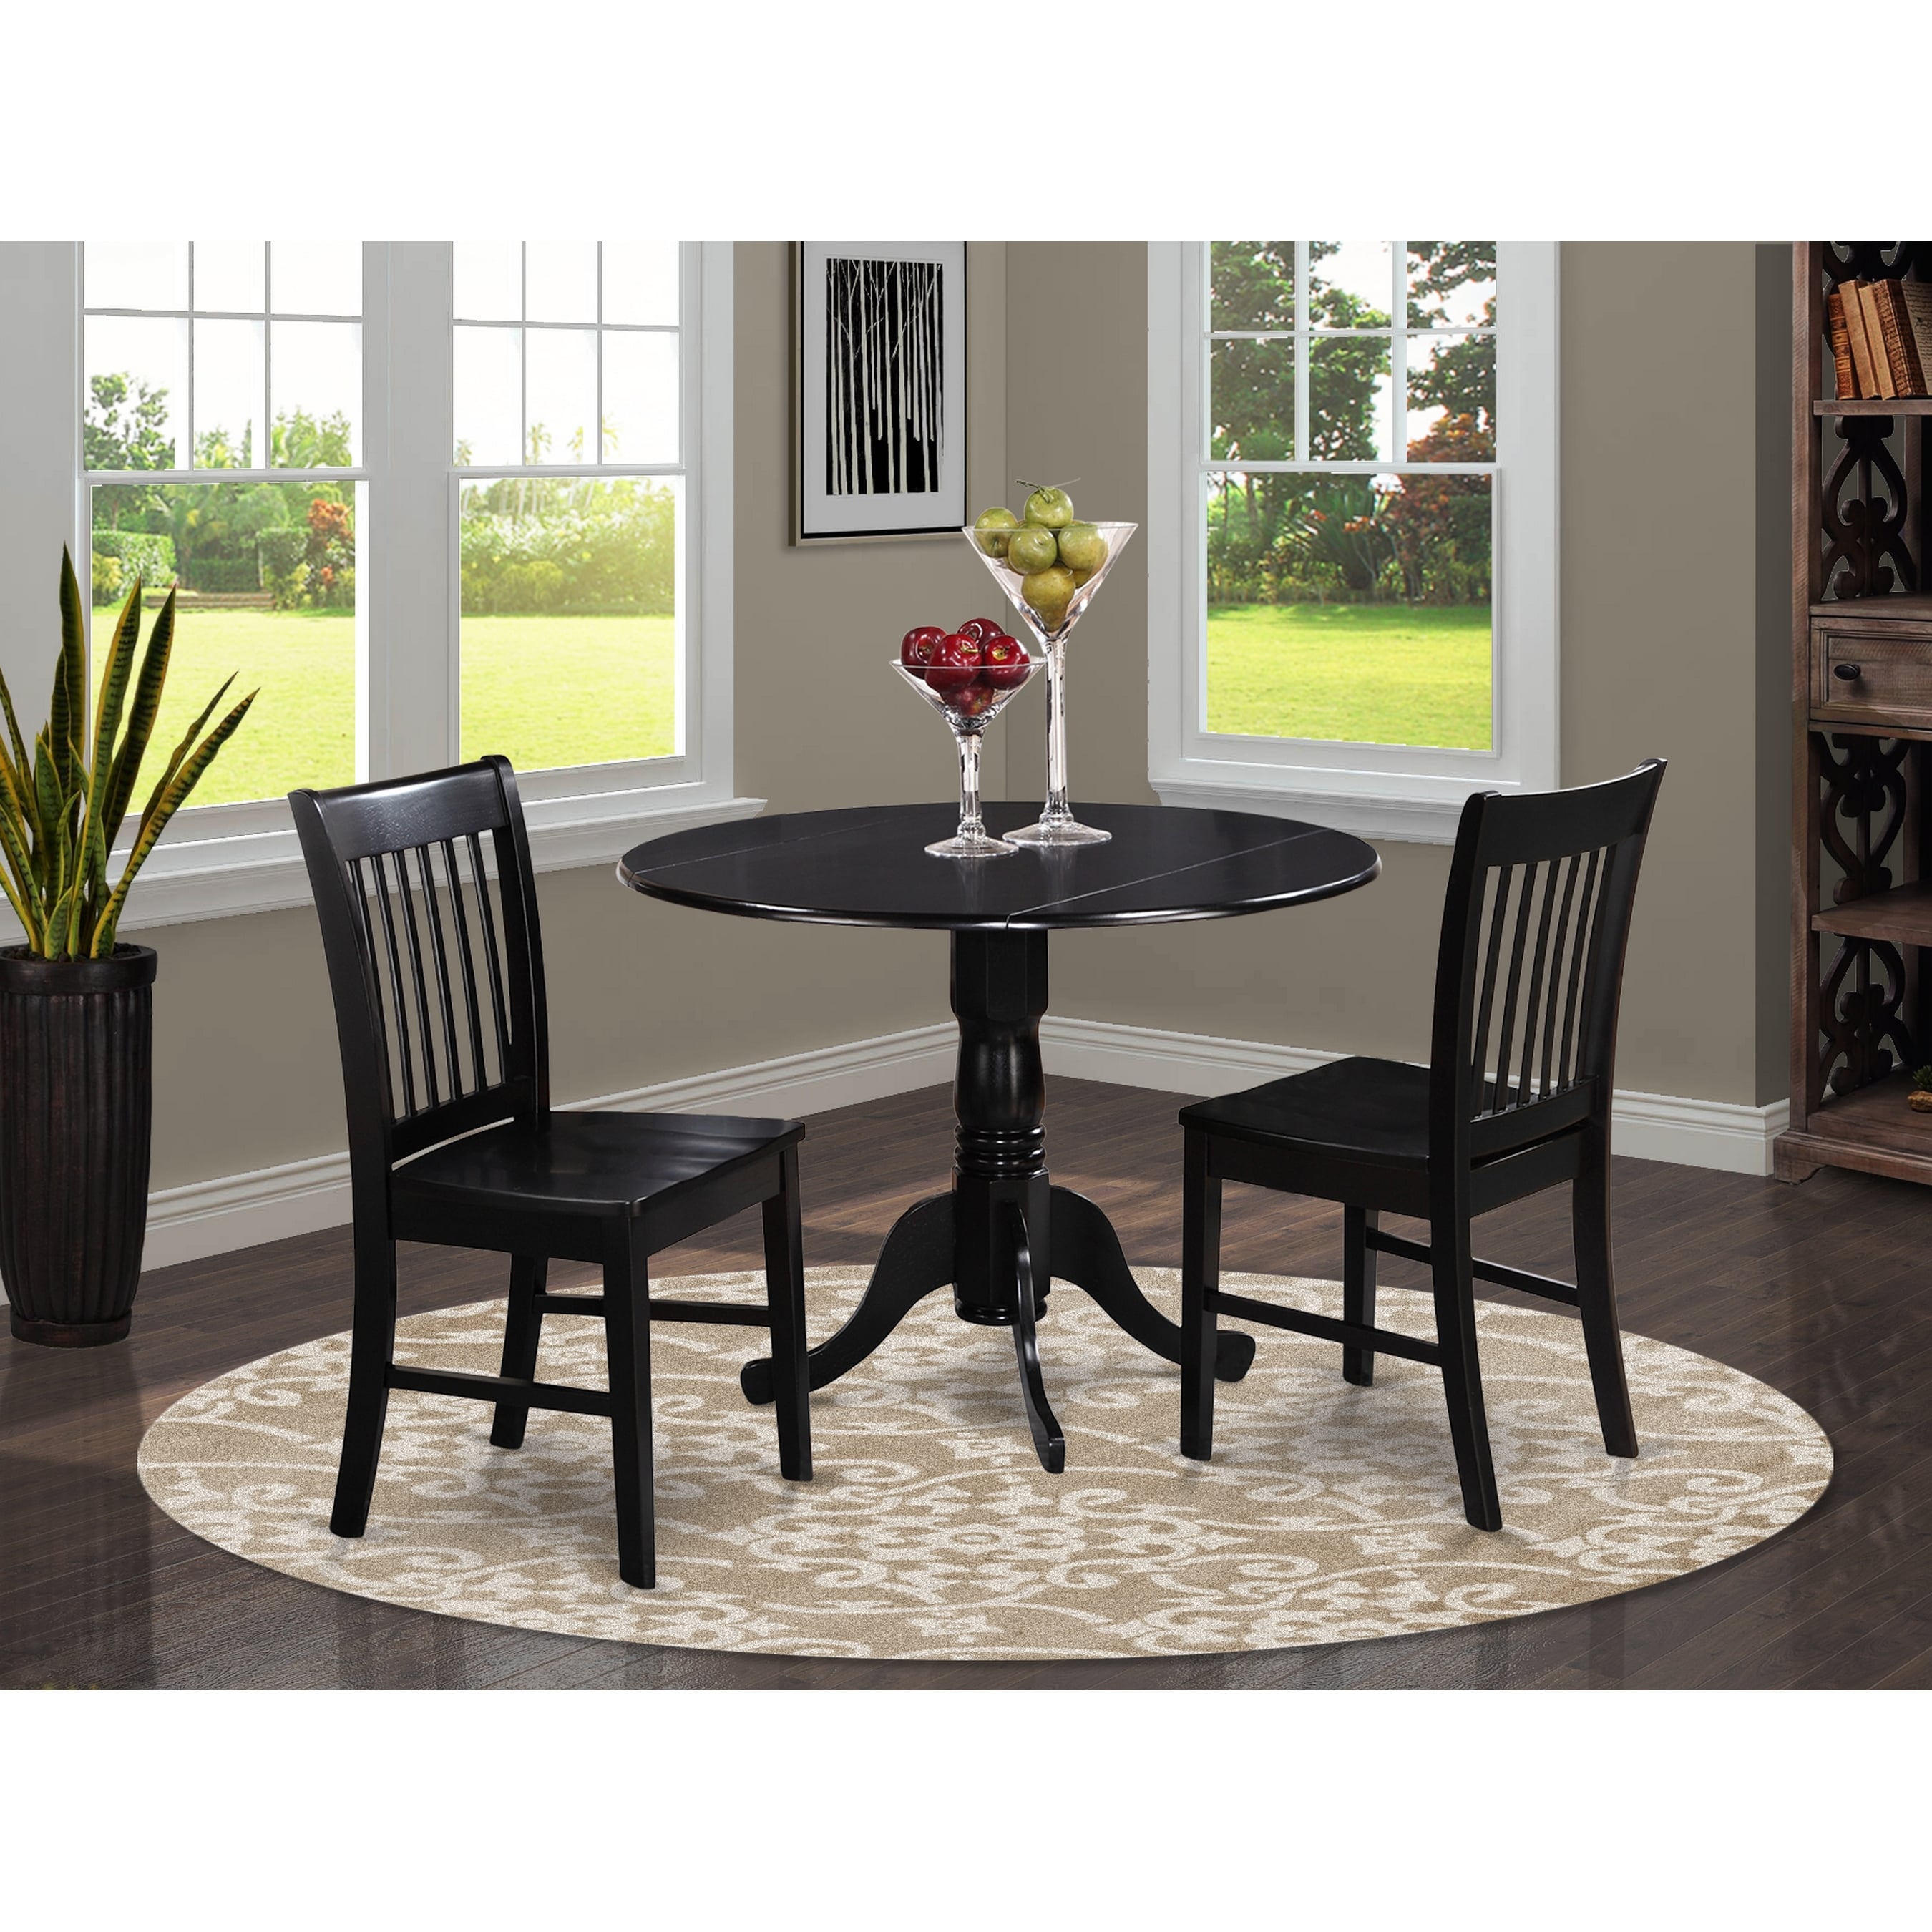 Black Kitchen Table Plus 2 Dinette Chairs 3 Piece Dining Set Overstock 10201083